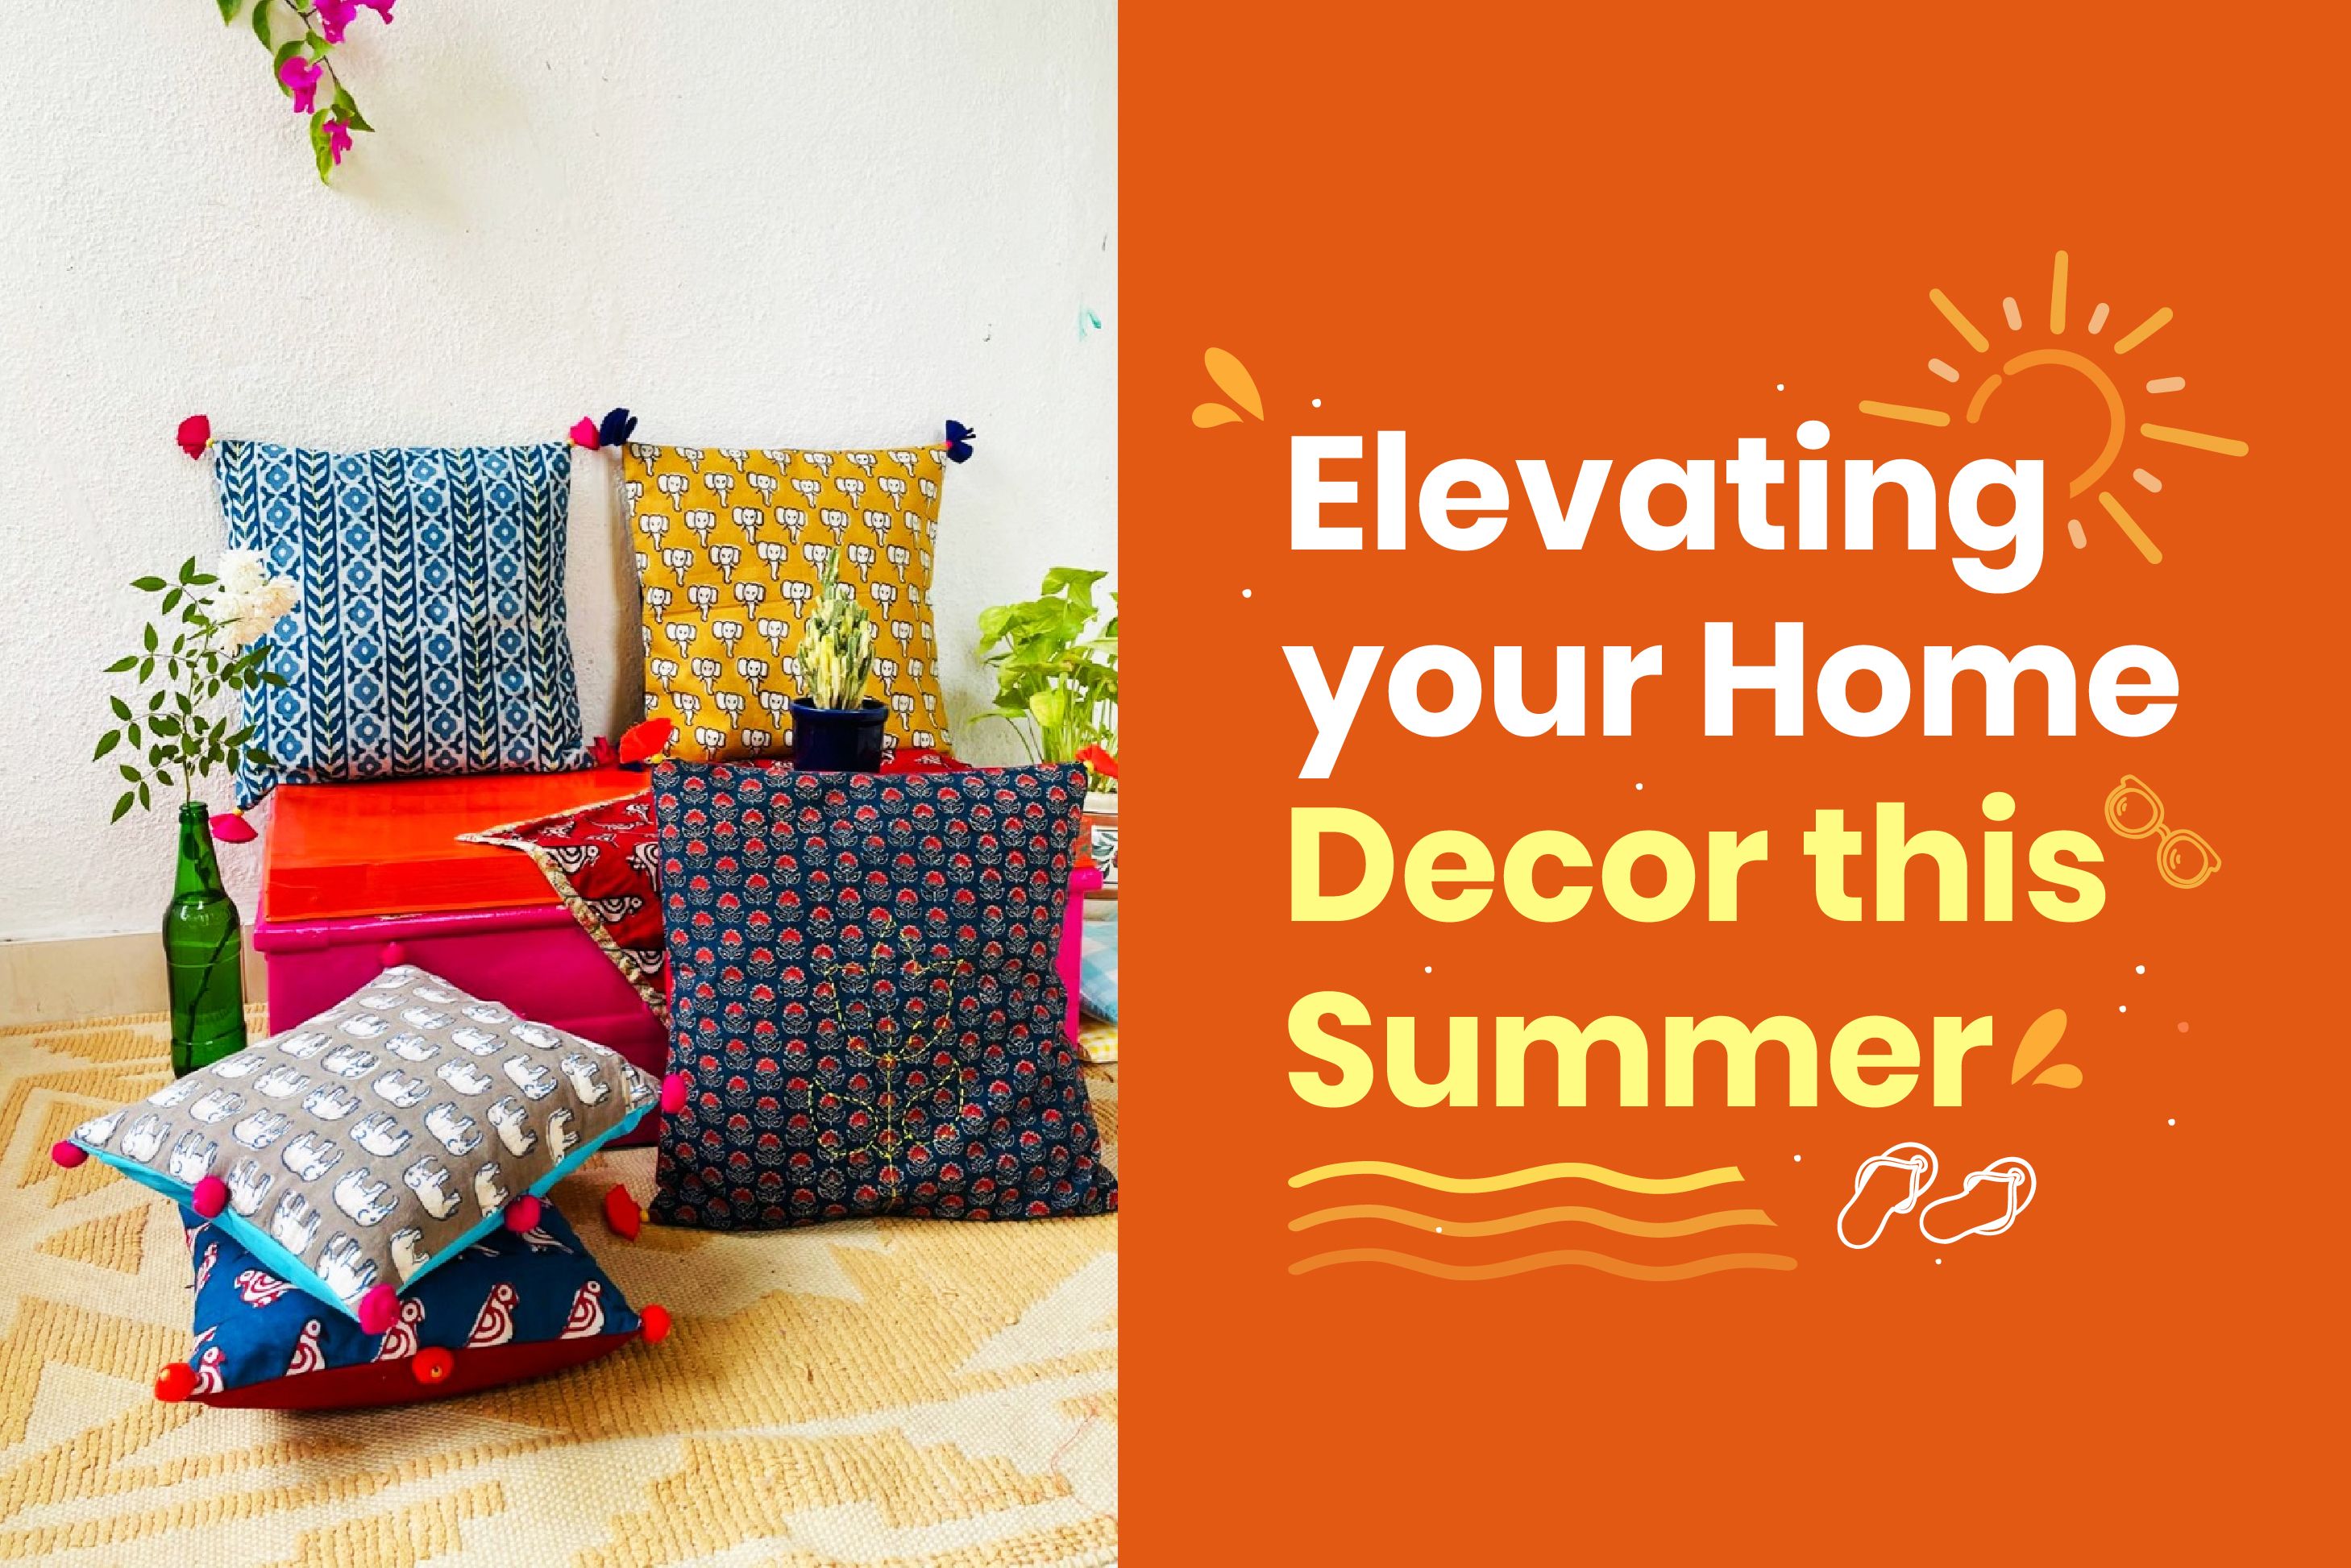 Elevating your Home Decor this Summer